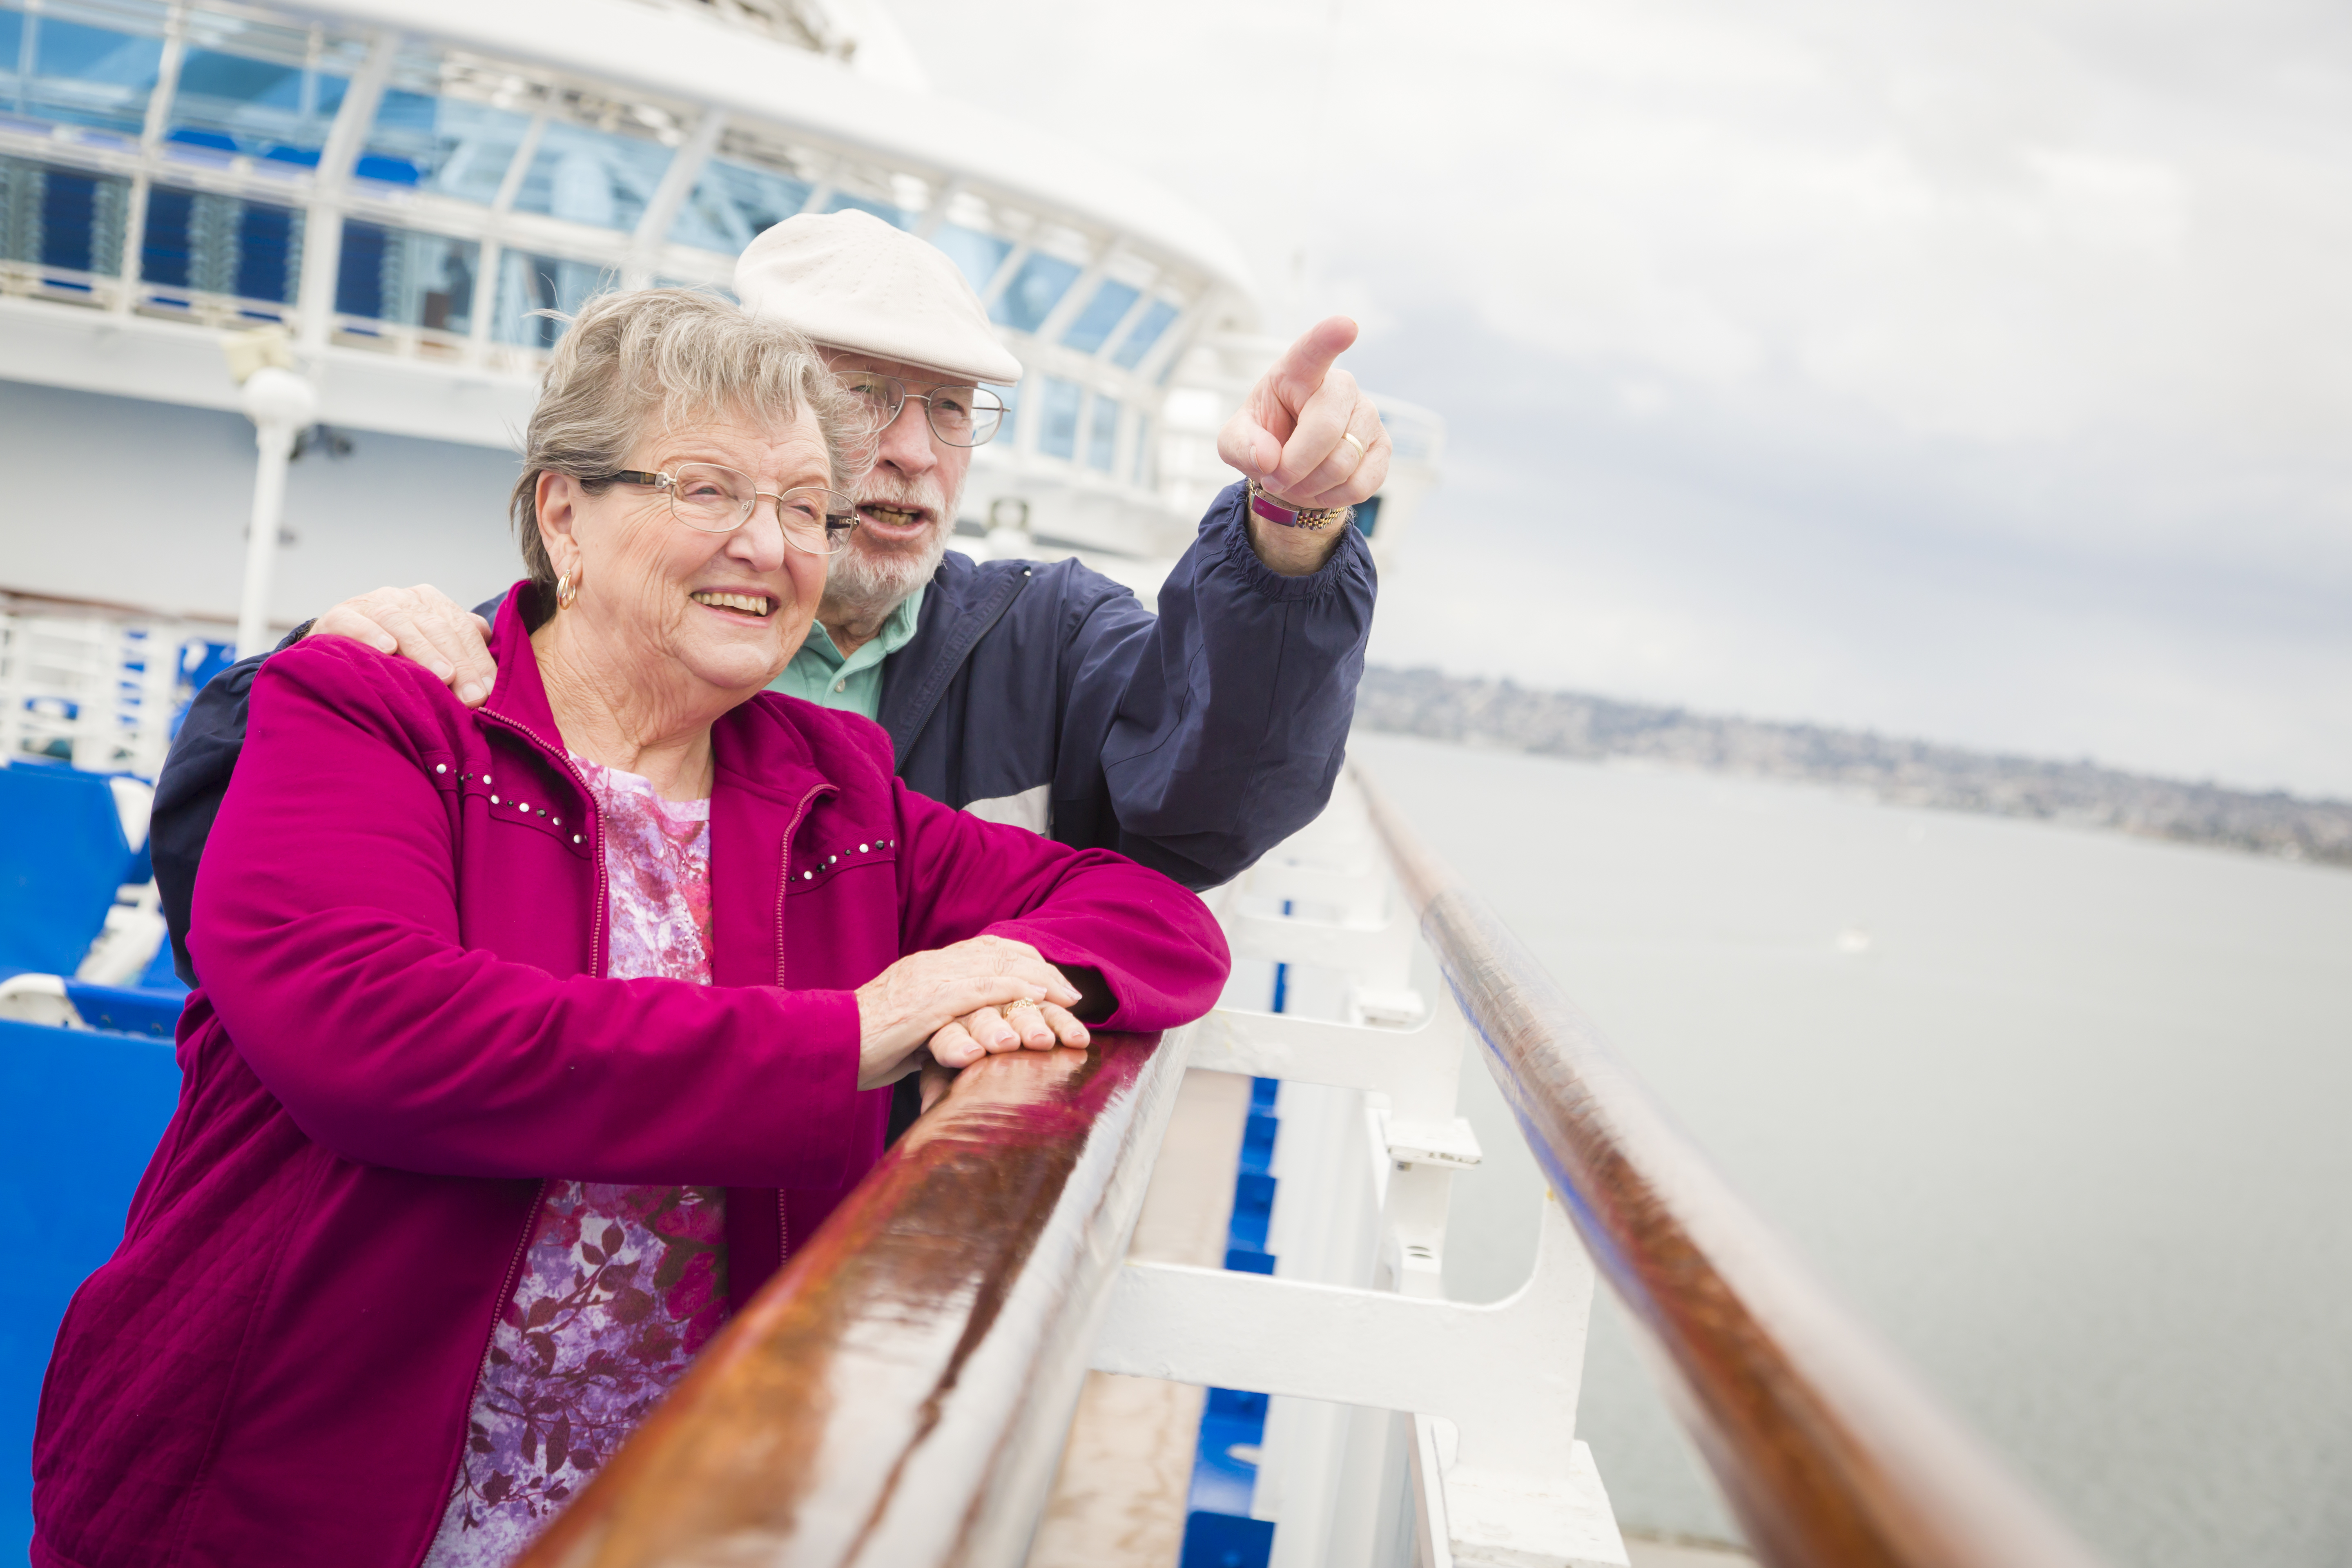 Man and woman on cruise ship.